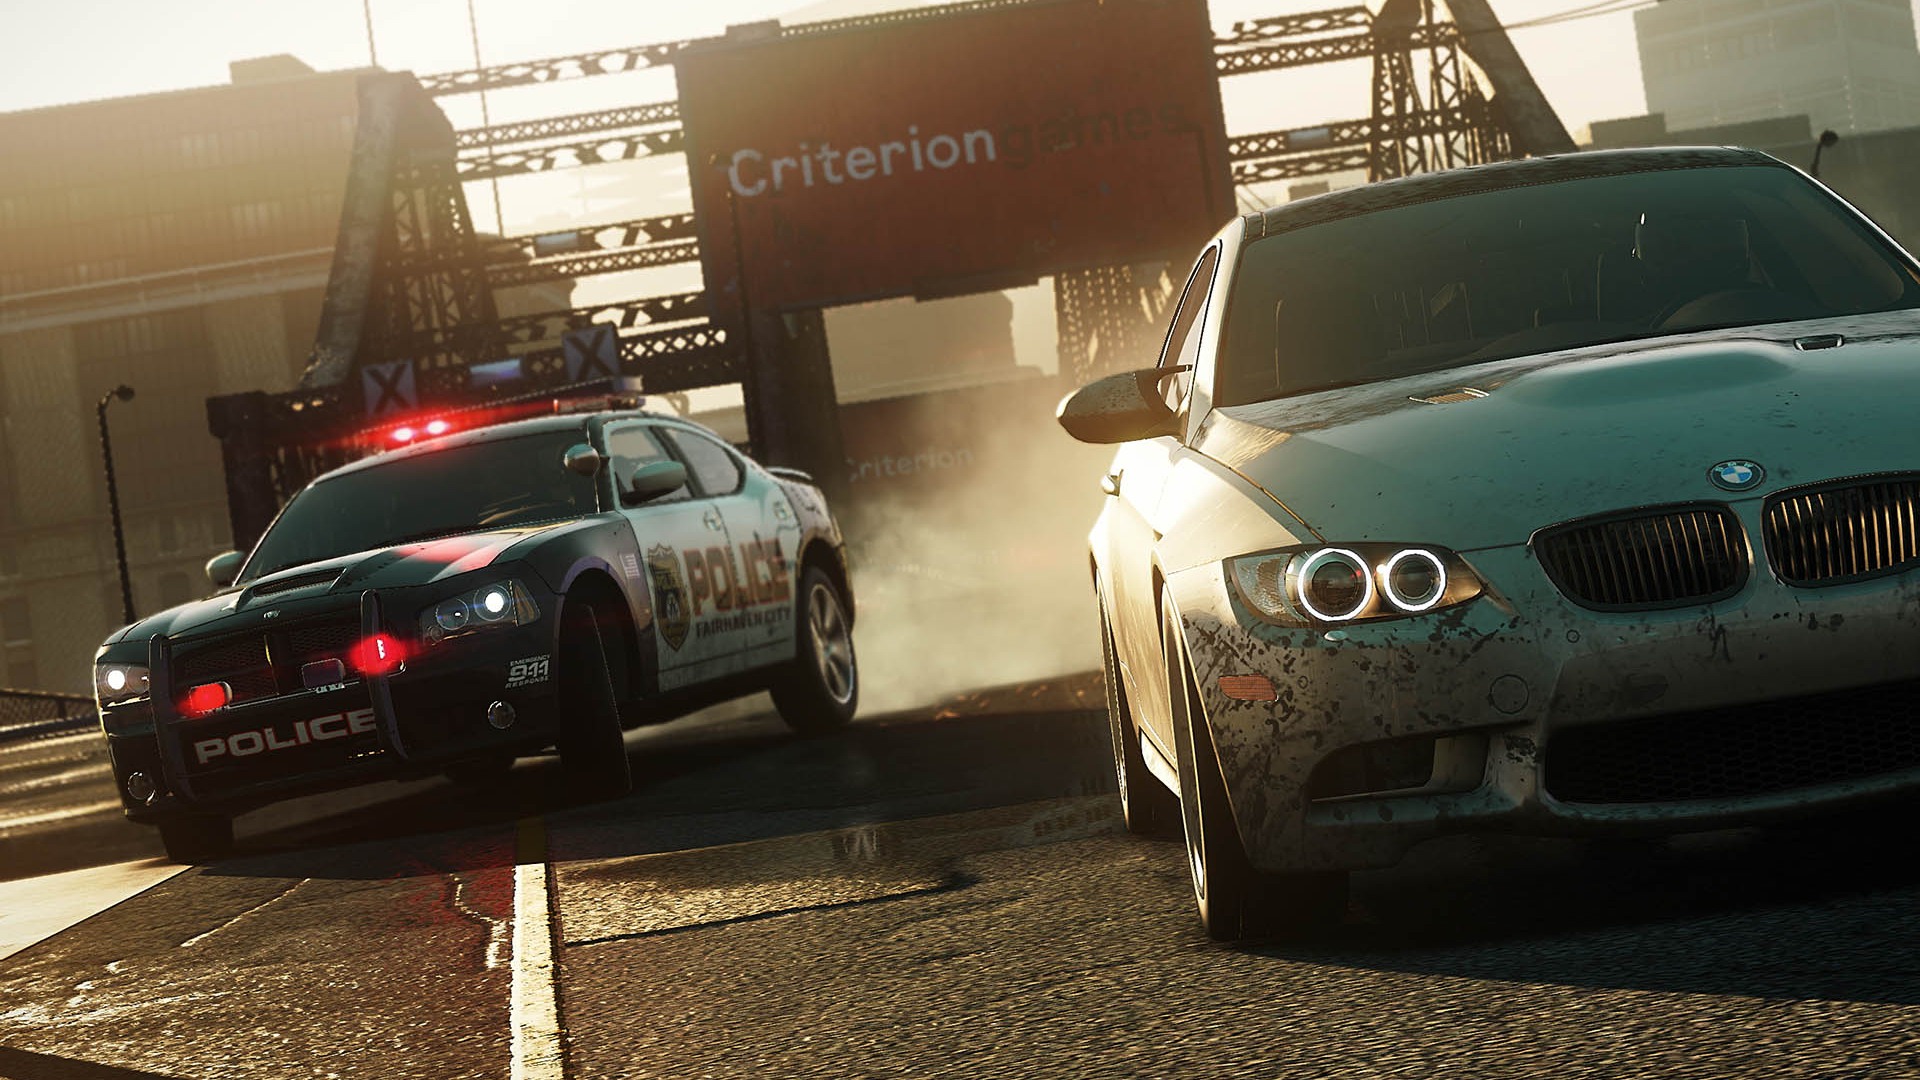 Need for Speed: Most Wanted 极品飞车17：最高通缉 高清壁纸7 - 1920x1080